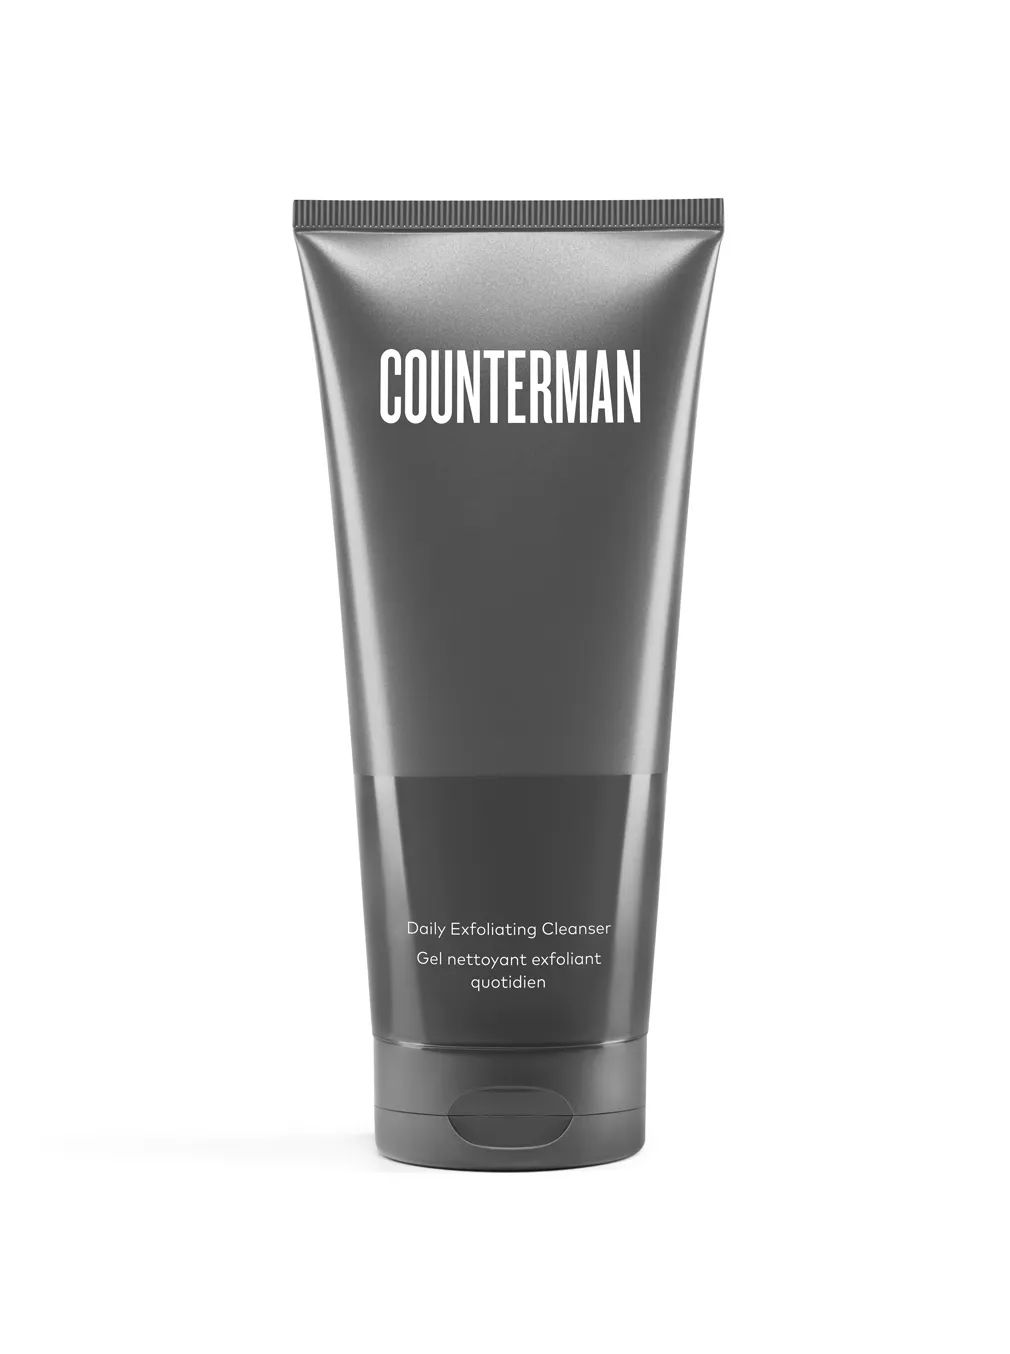 Counterman Daily Exfoliating Cleanser - Beautycounter - Skin Care, Makeup, Bath and Body and more... | Beautycounter.com